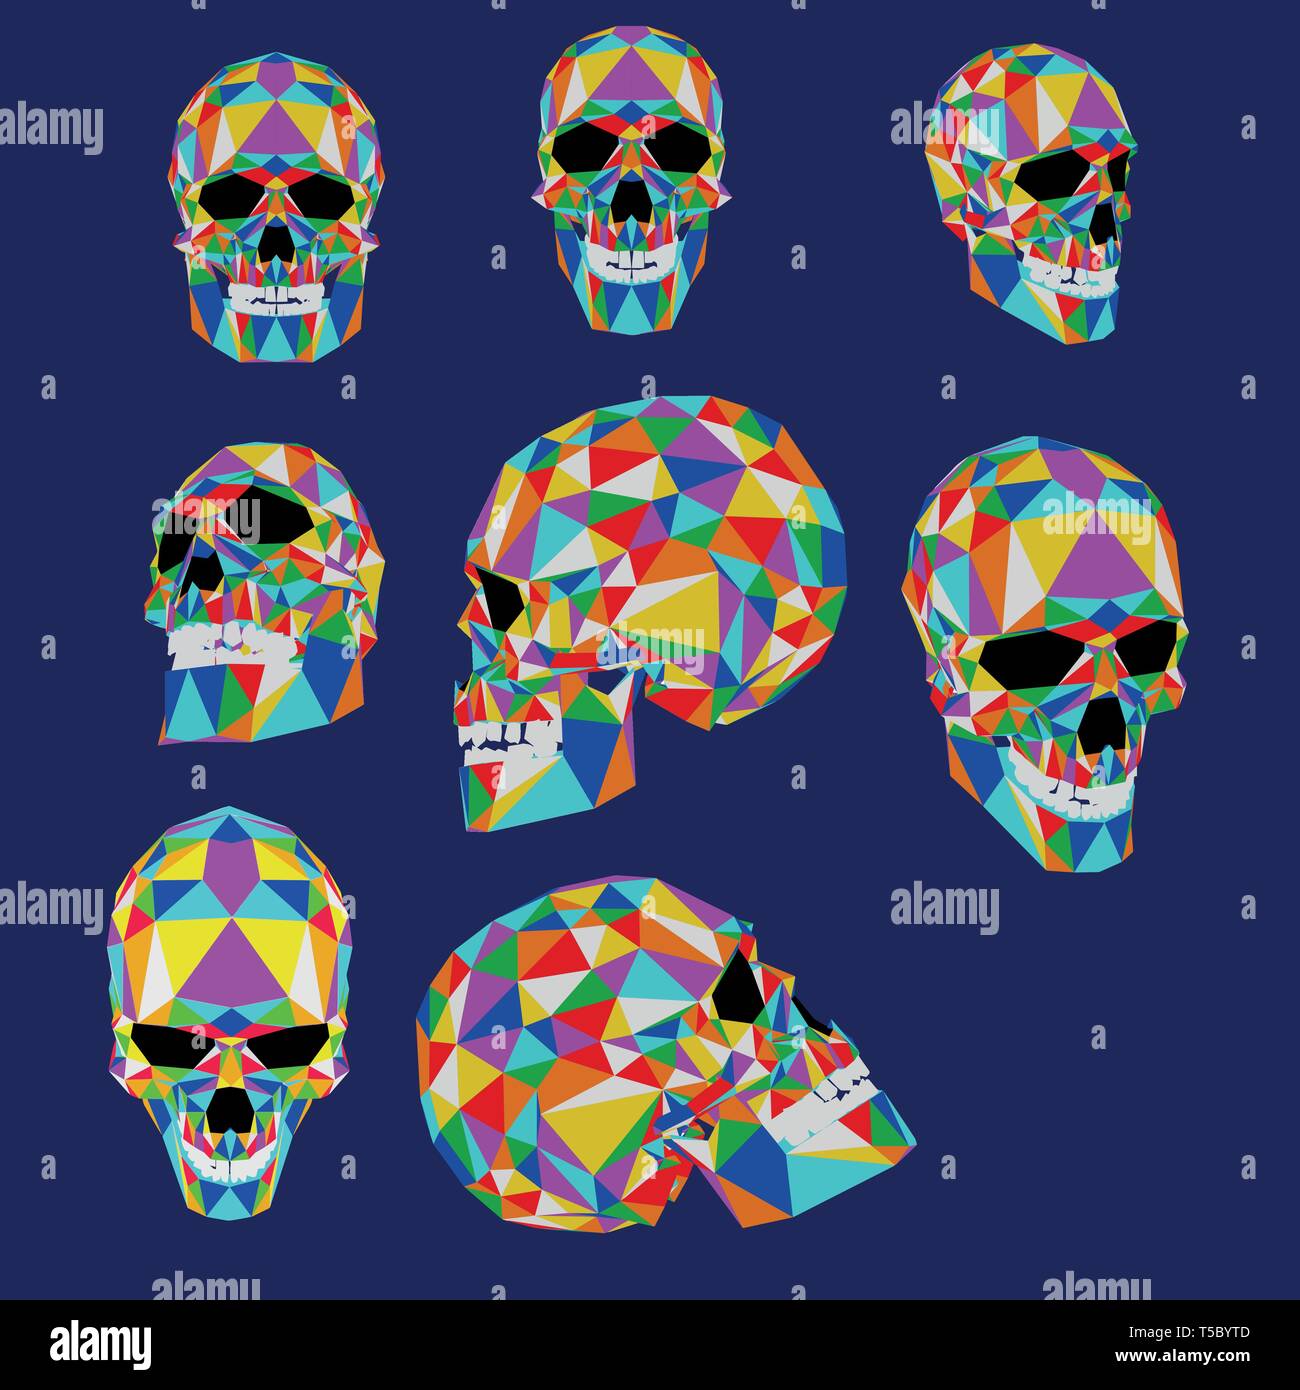 Skull colorful illustration from polygons. Typography, t-shirt graphics, vectors.EPS 10. Stock Vector